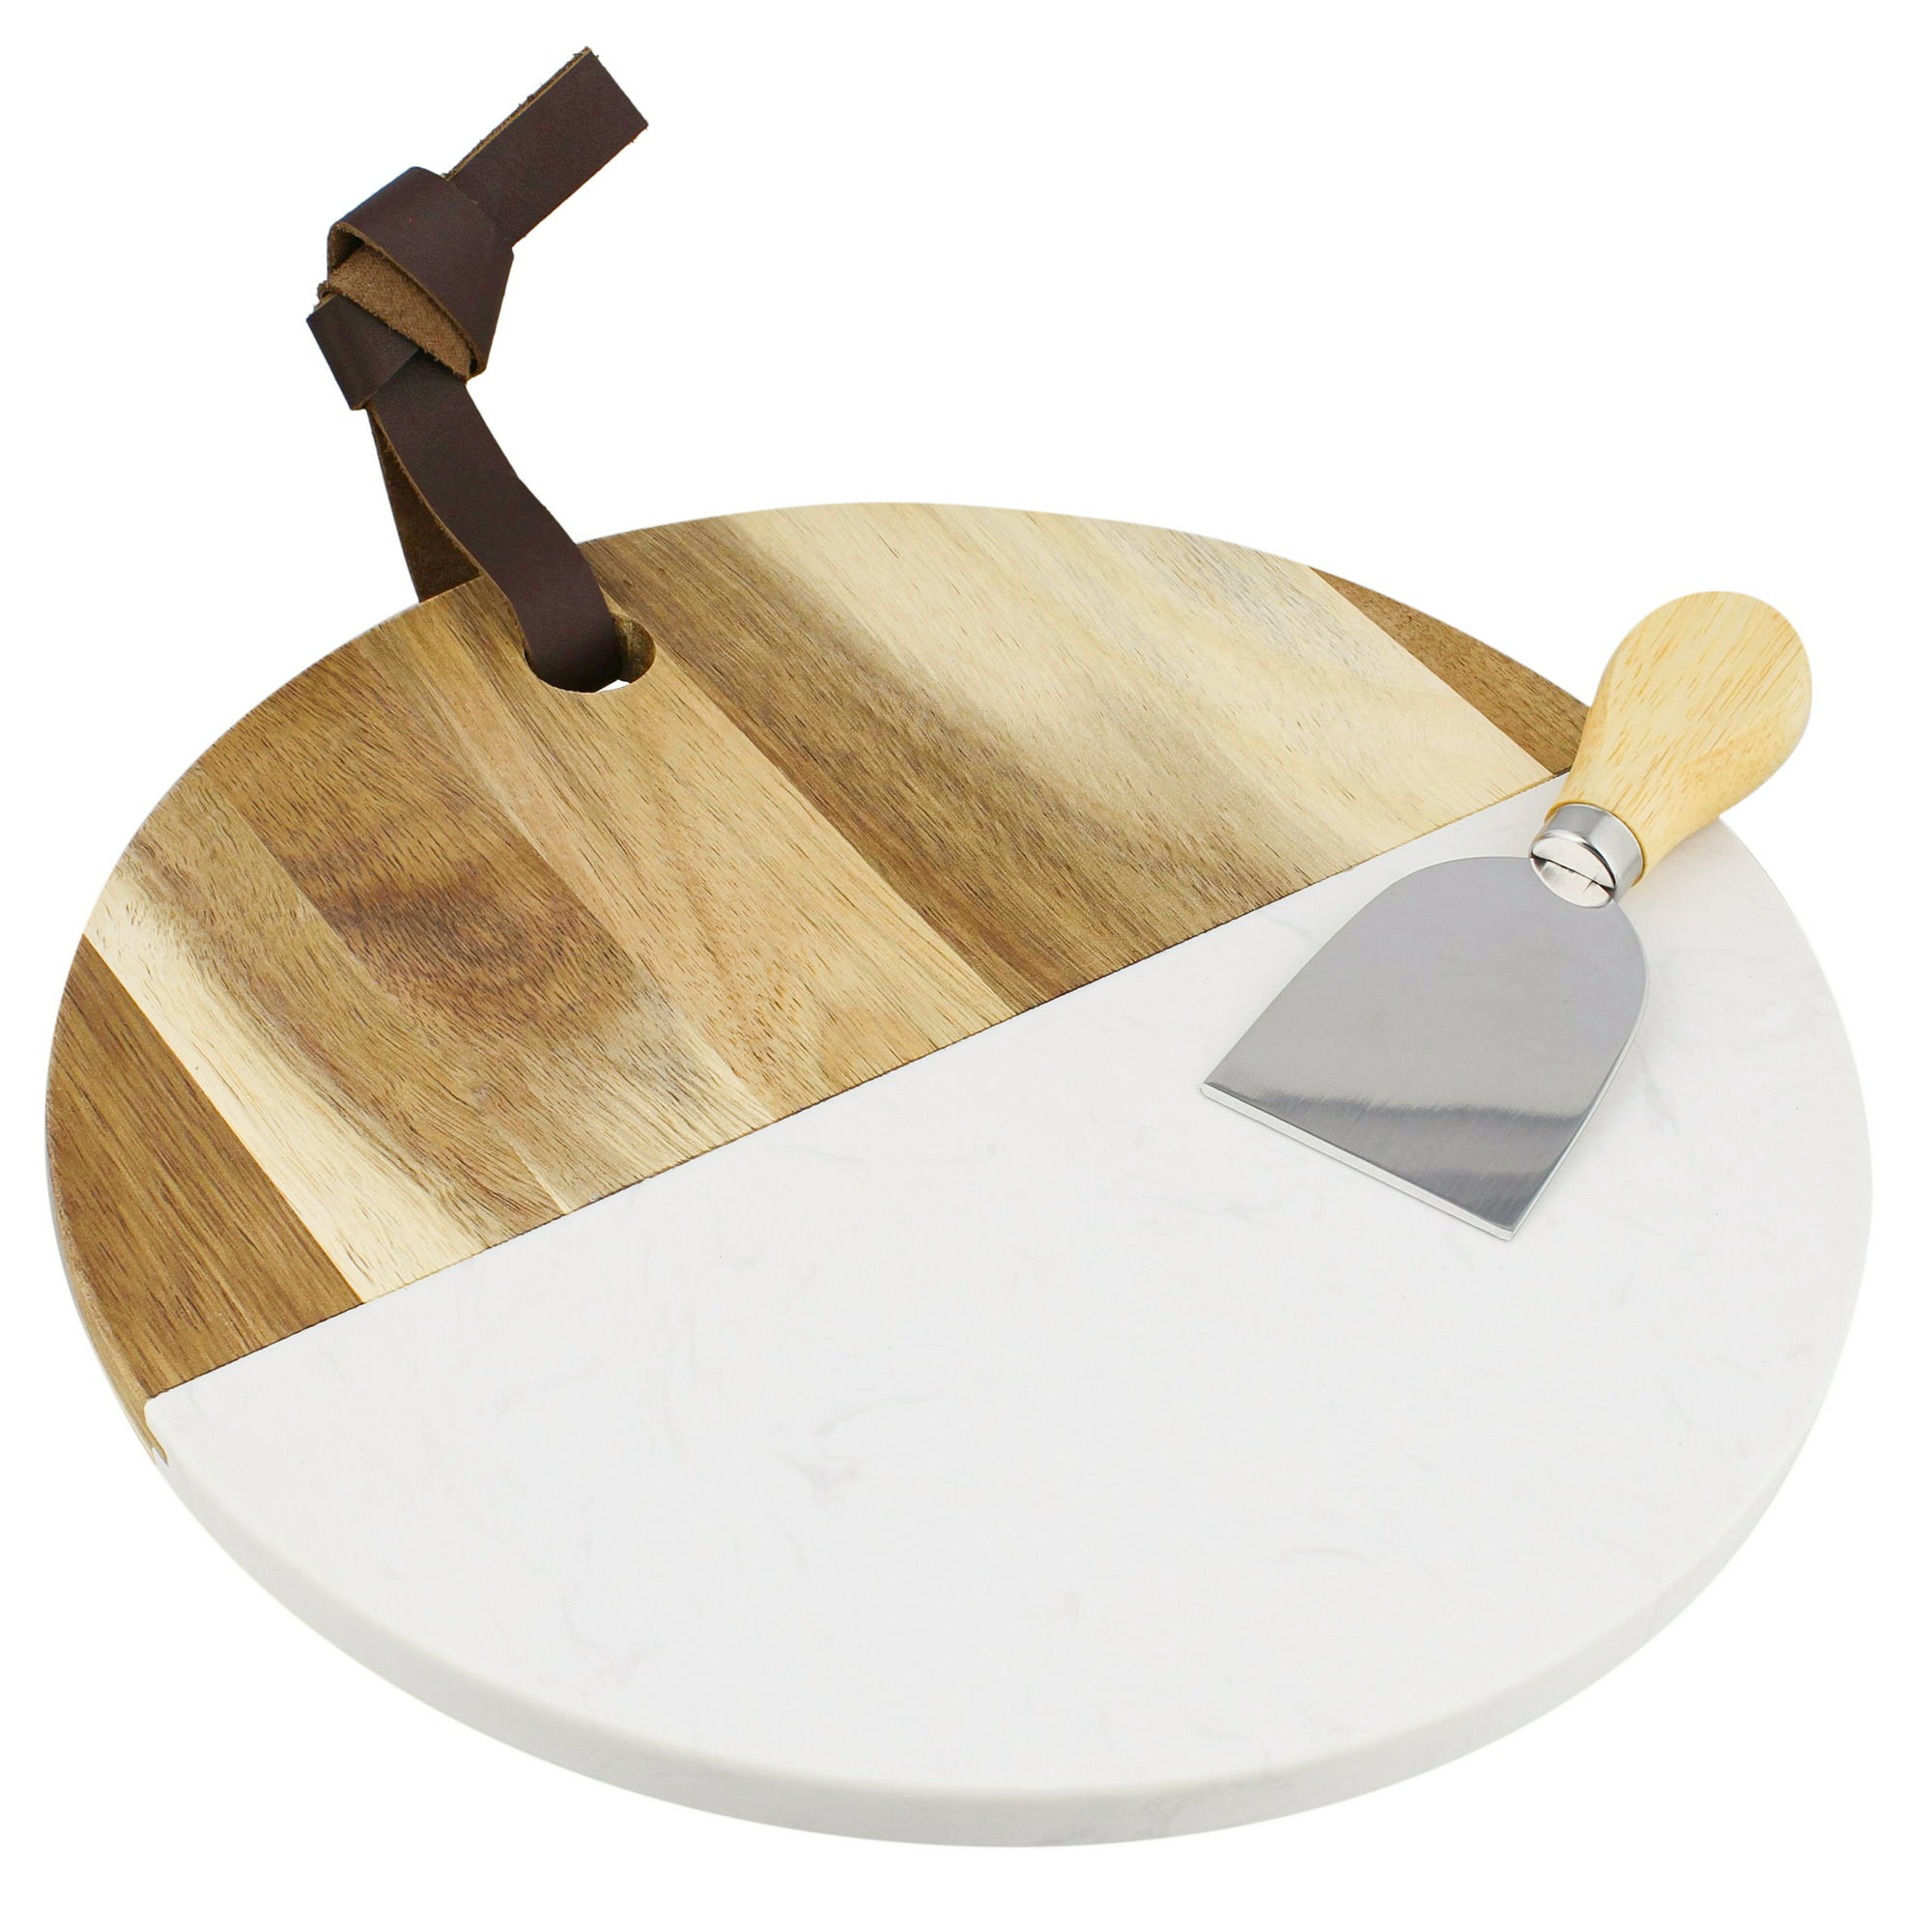 G Francis Cheese Board and Knife Set